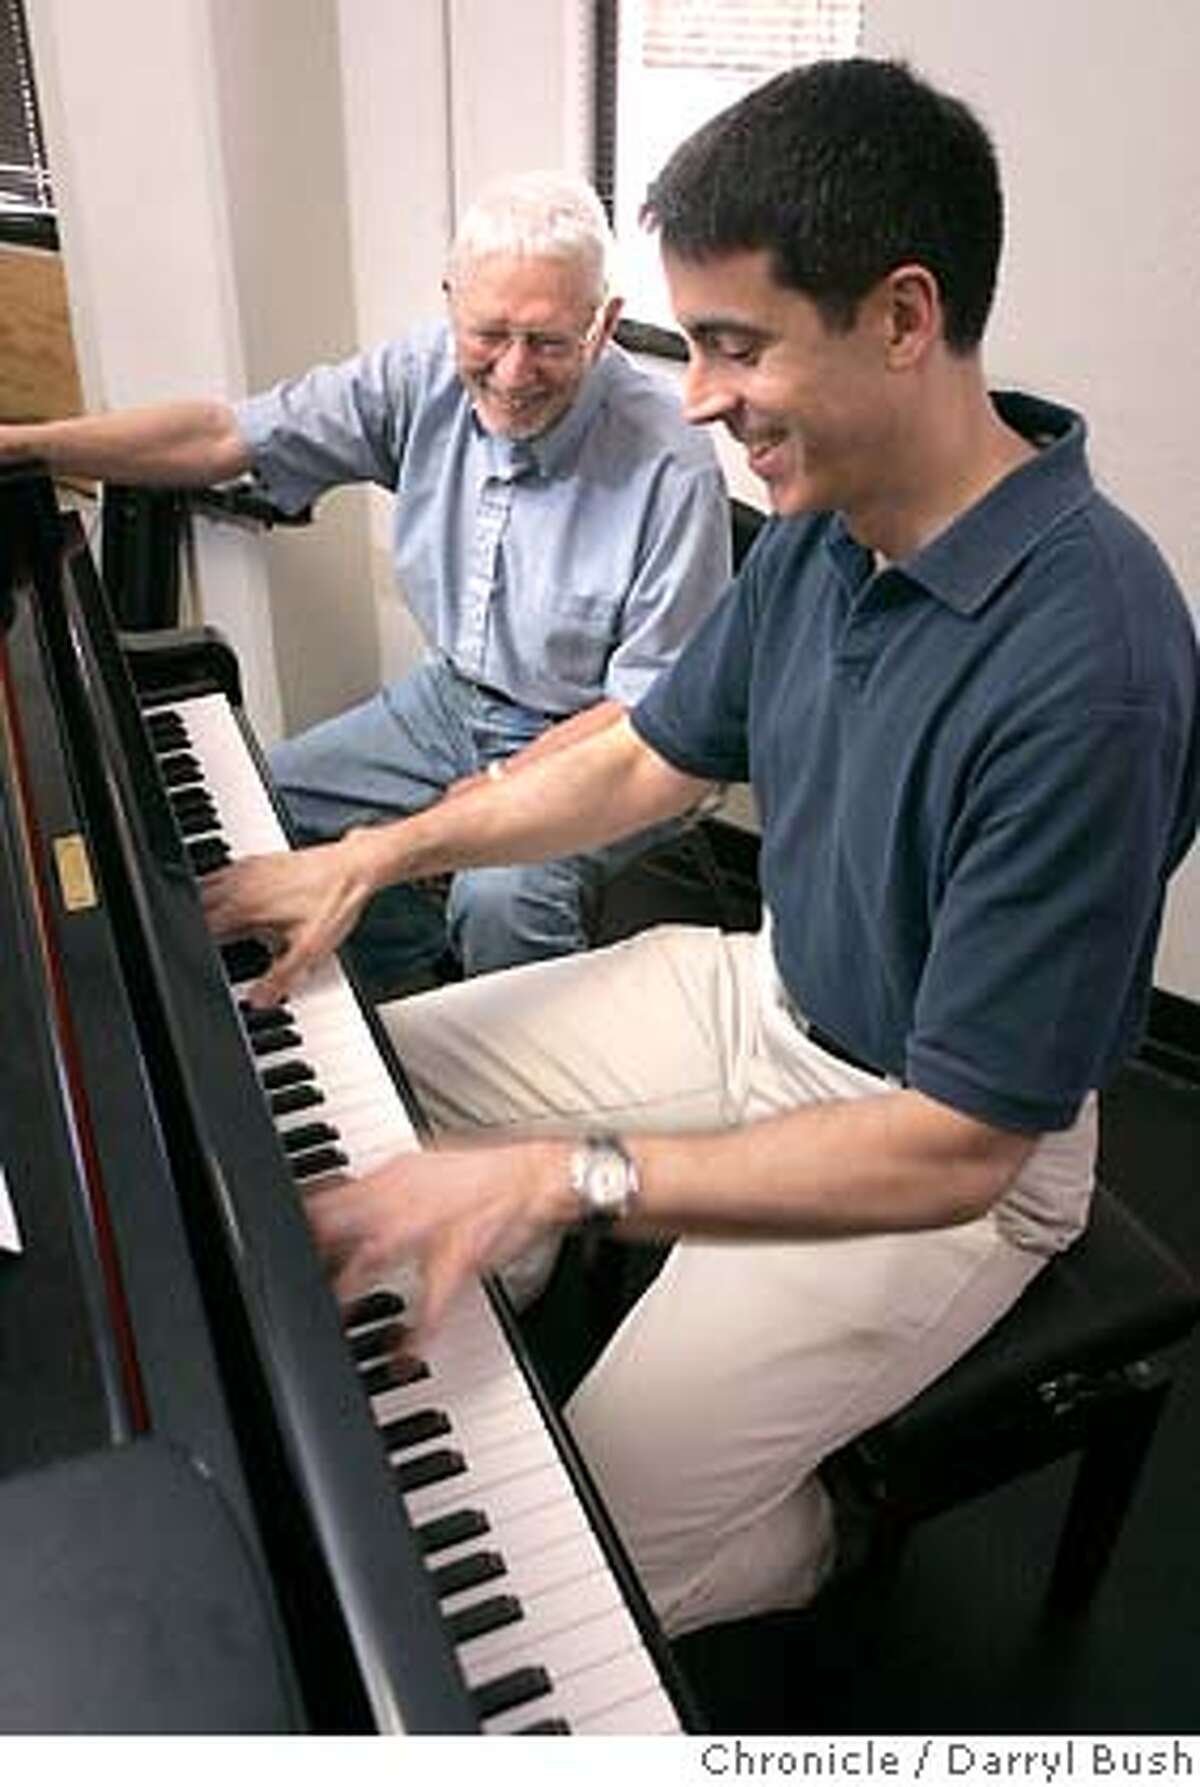 haroldmaude_039_db.jpg Writers Joseph Thalken at piano and Tom Jones, back left, work on music during rehearsal for the new musical Harold and Maude opening at Theatreworks. Event on 6/21/05 in Mountain View. Darryl Bush / The Chronicle MANDATORY CREDIT FOR PHOTOG AND SF CHRONICLE/ -MAGS OUT